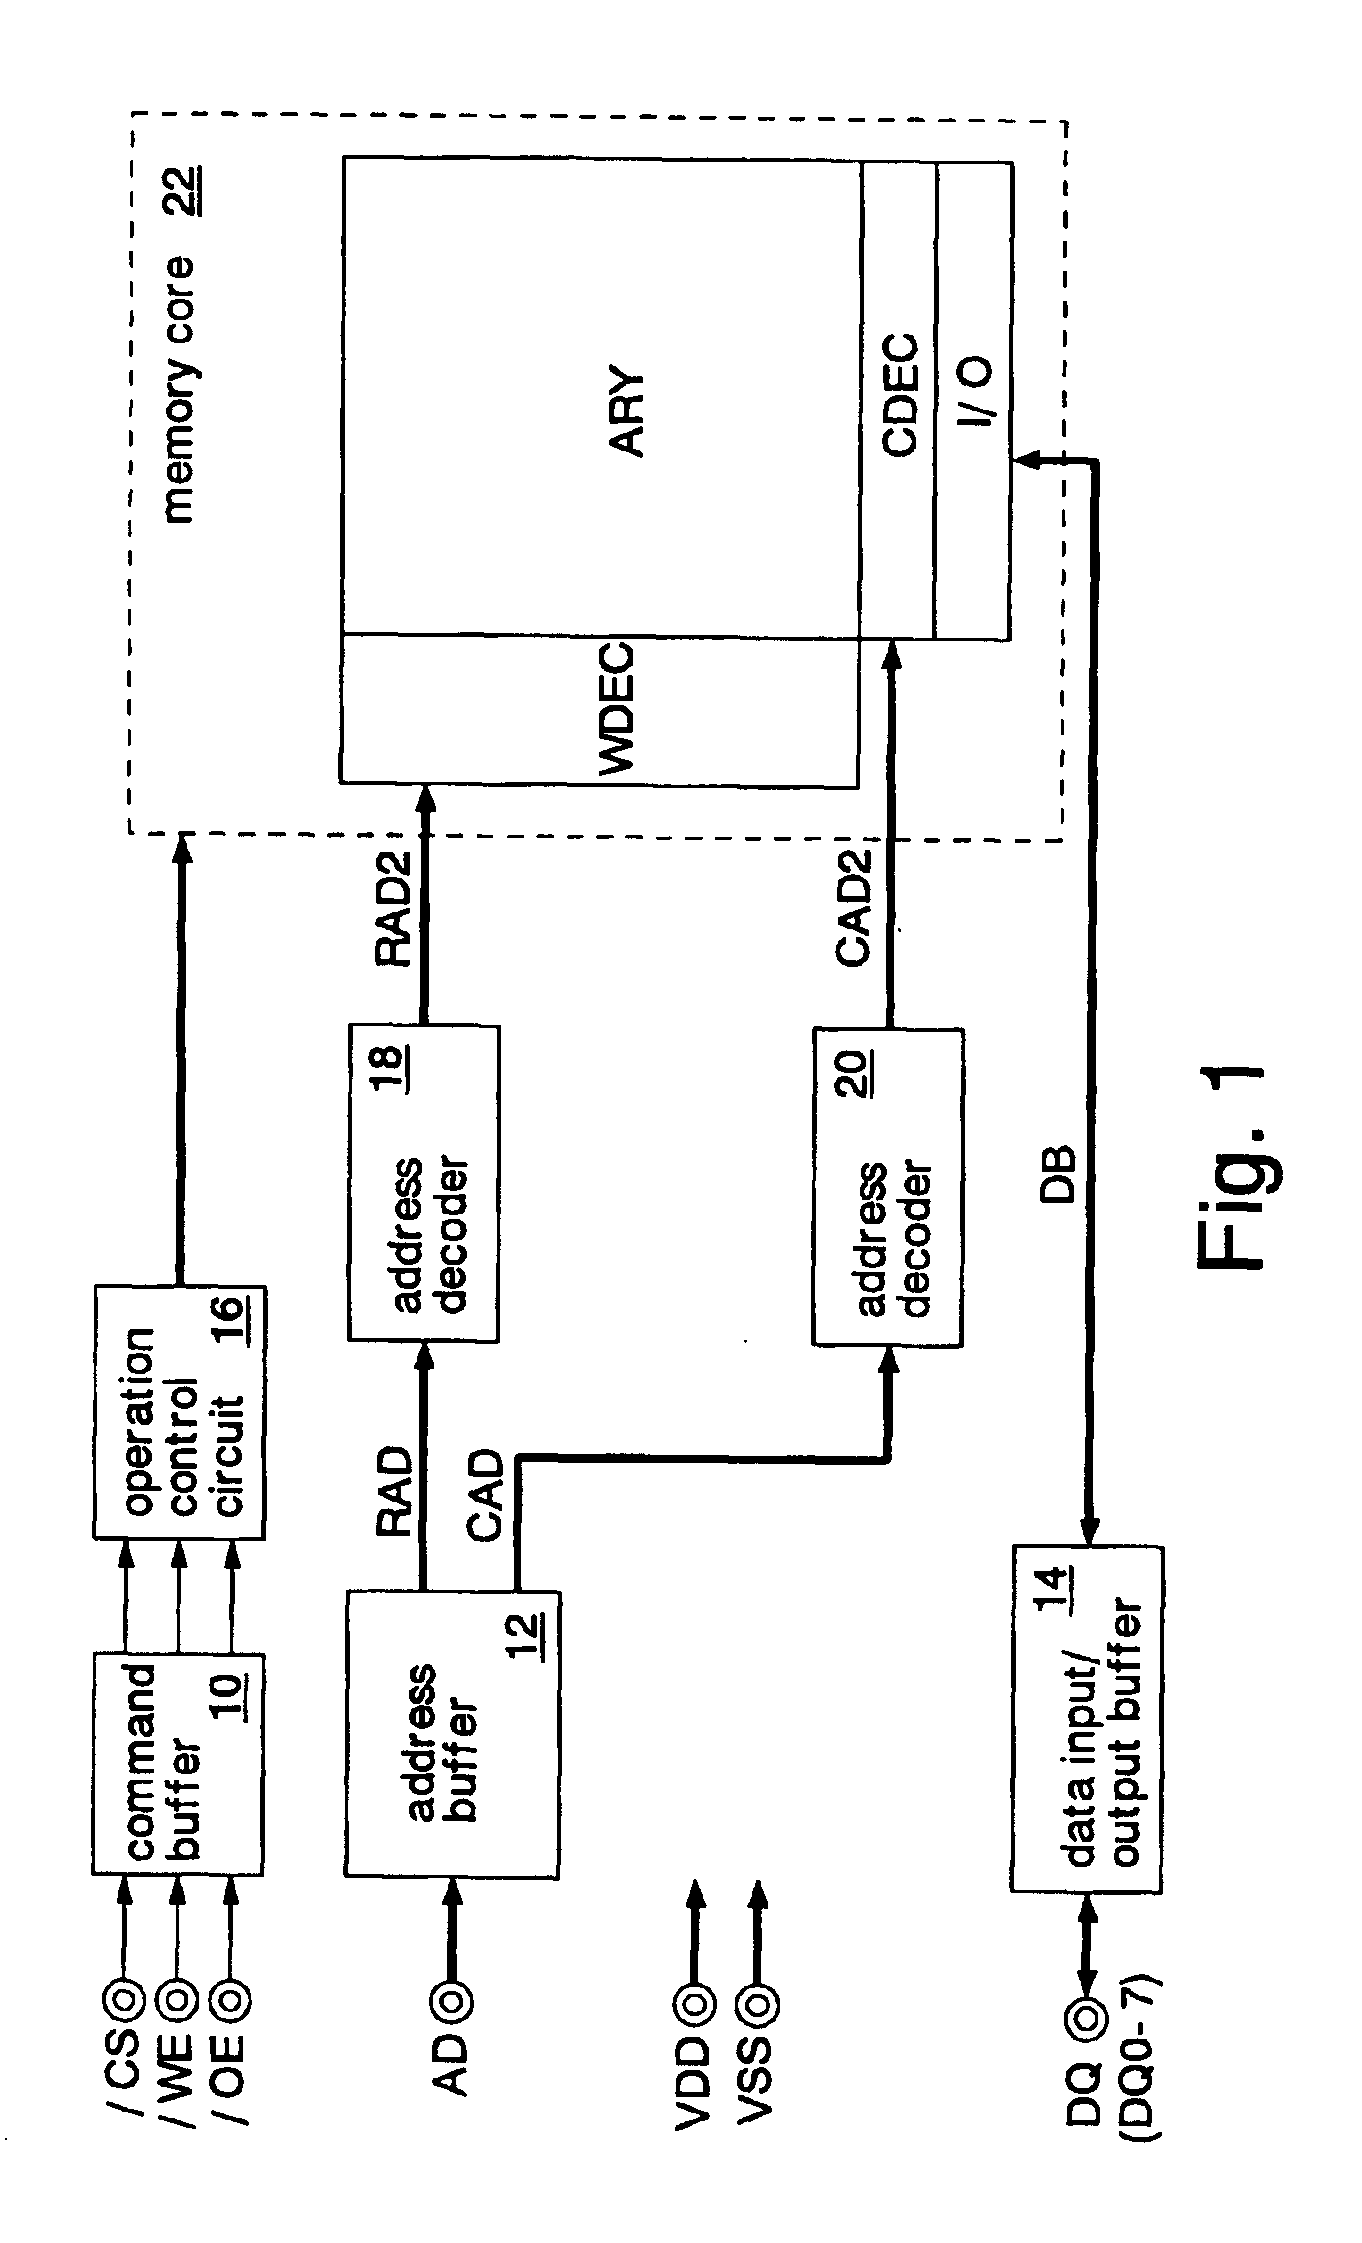 Semiconductor memory having hierarchical bit line structure